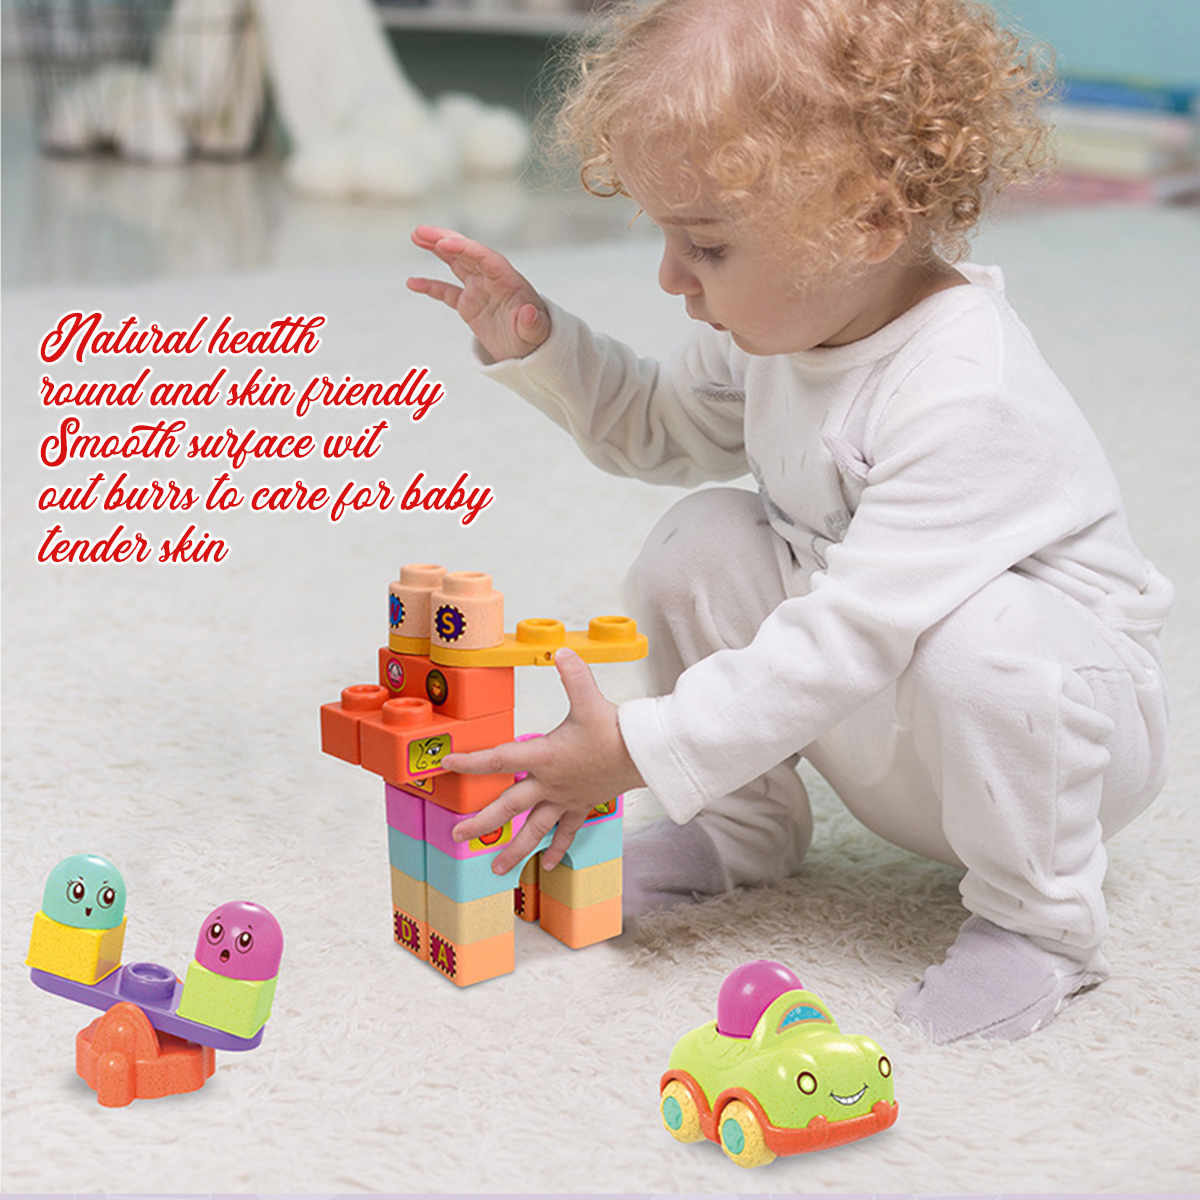 49PCSSET-Childrens-Building-Blocks-Toys-Base-Plate-Safety-Skin-friendly-Early-Educational-Toy-Gift-1598205-3